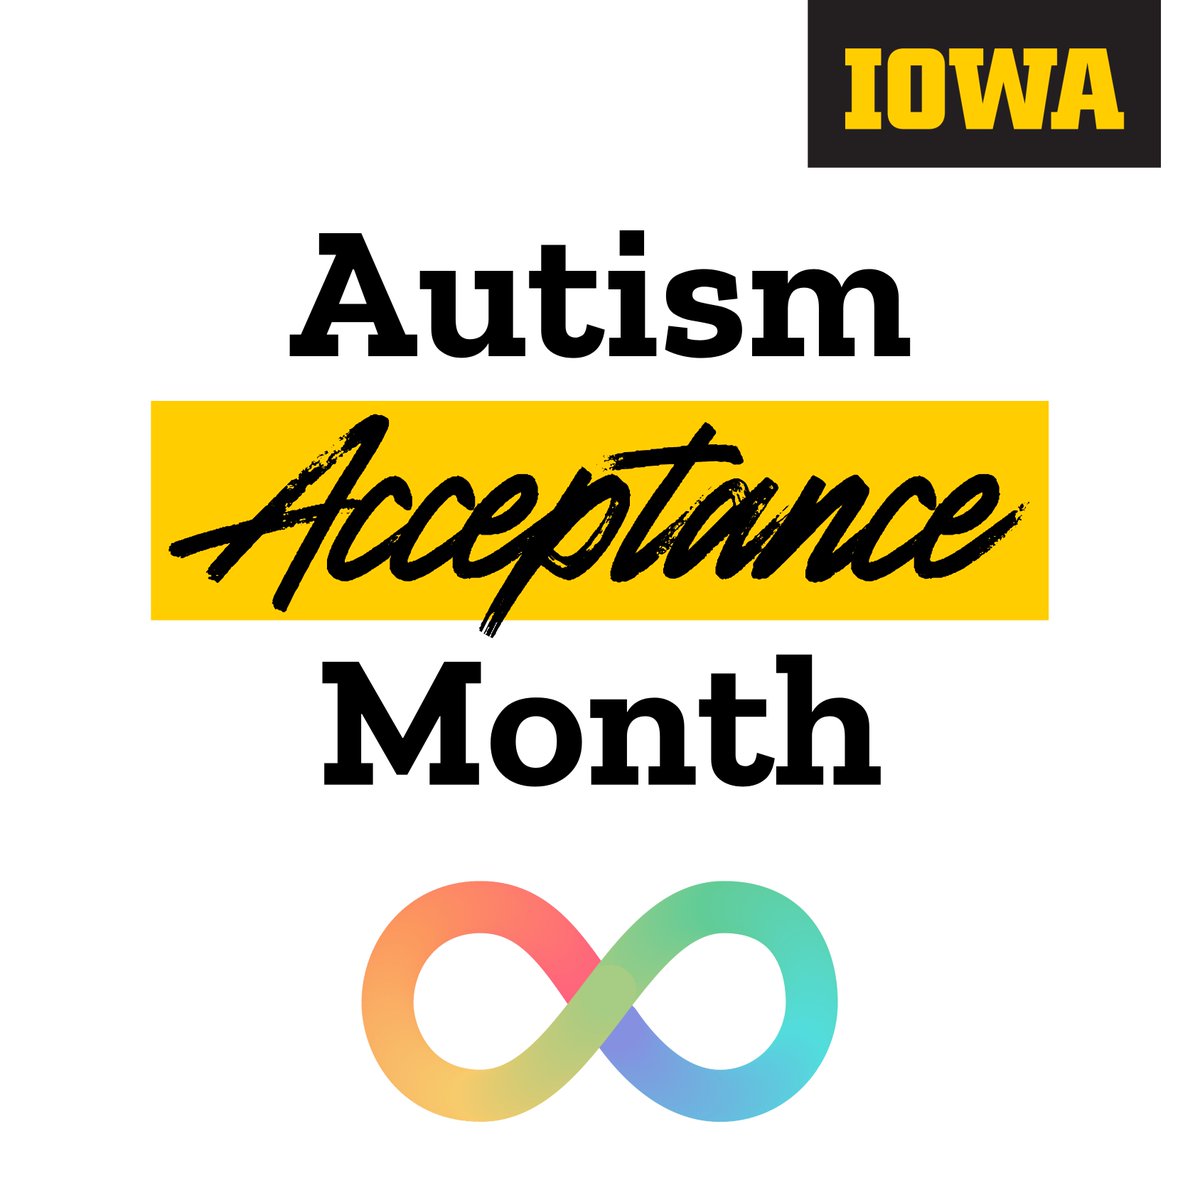 It's the first day of Autism Acceptance Month! At the Belin-Blank Center, we believe that autistic students deserve to be accepted and accommodated in the classroom and beyond.